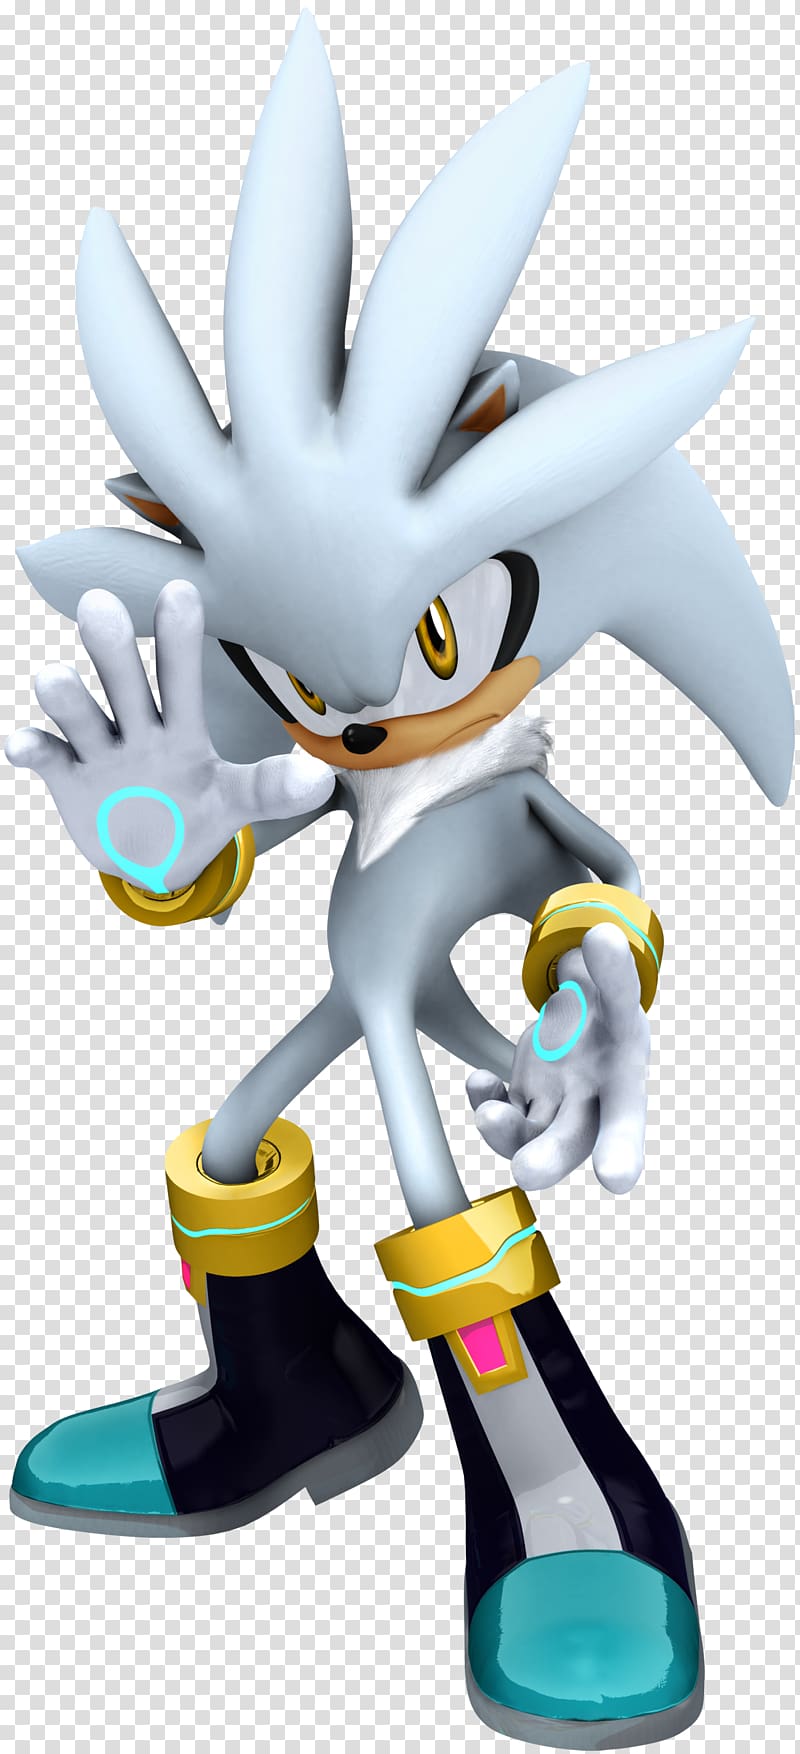 Sonic the Hedgehog Sonic Unleashed Sonic & Knuckles Doctor Eggman Knuckles the Echidna, silver transparent background PNG clipart